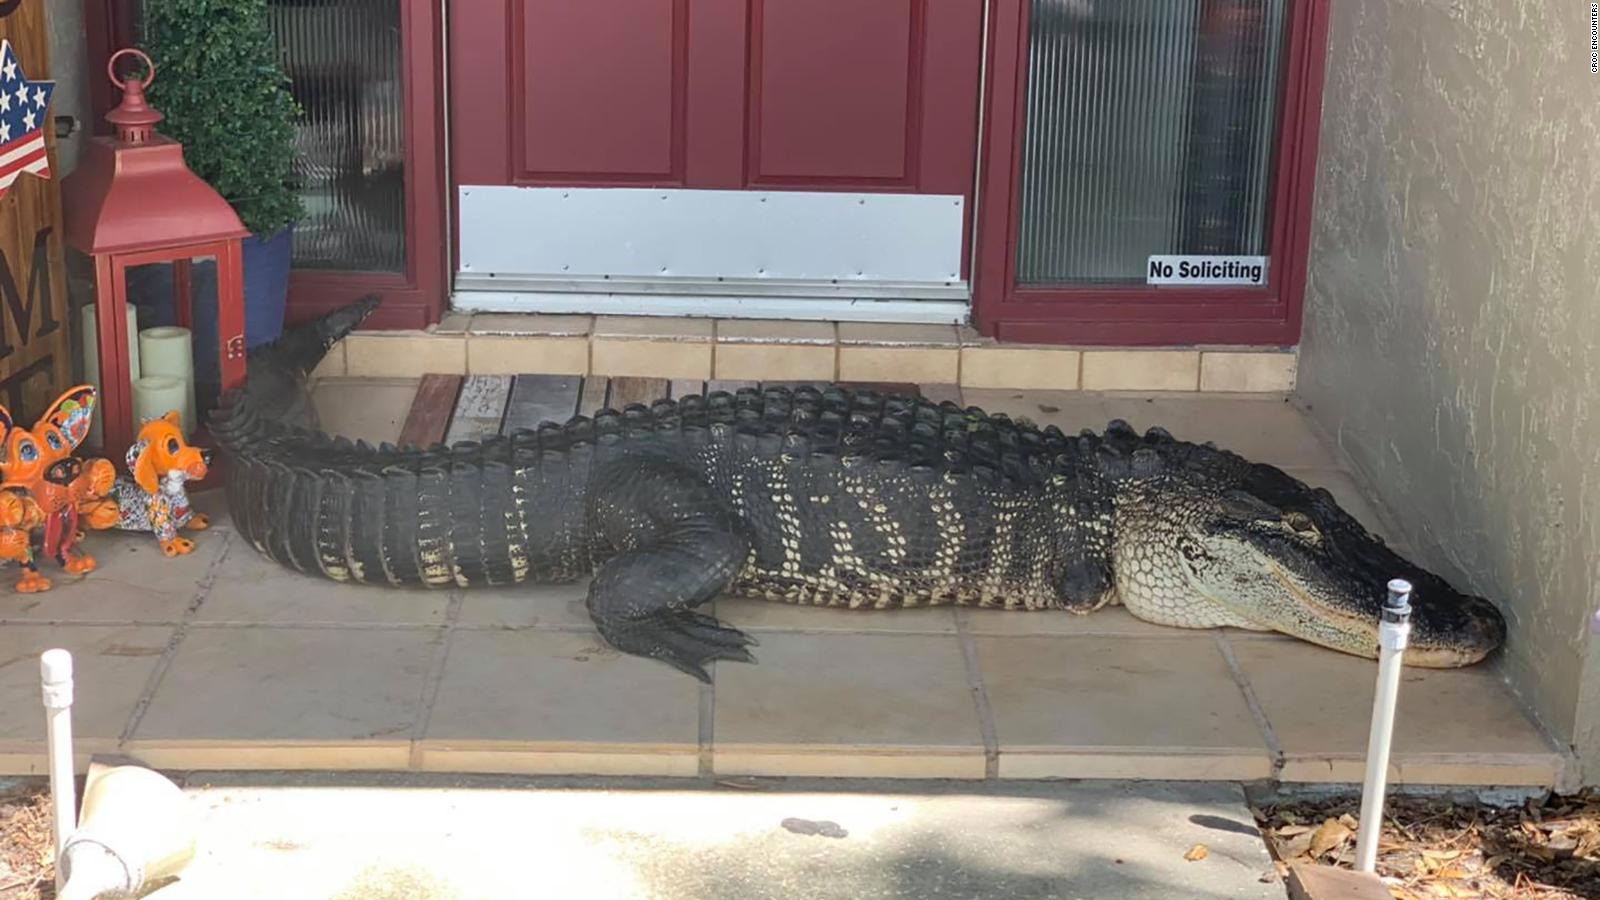 A family in Florida found a nearly 9foot alligator with missing limbs